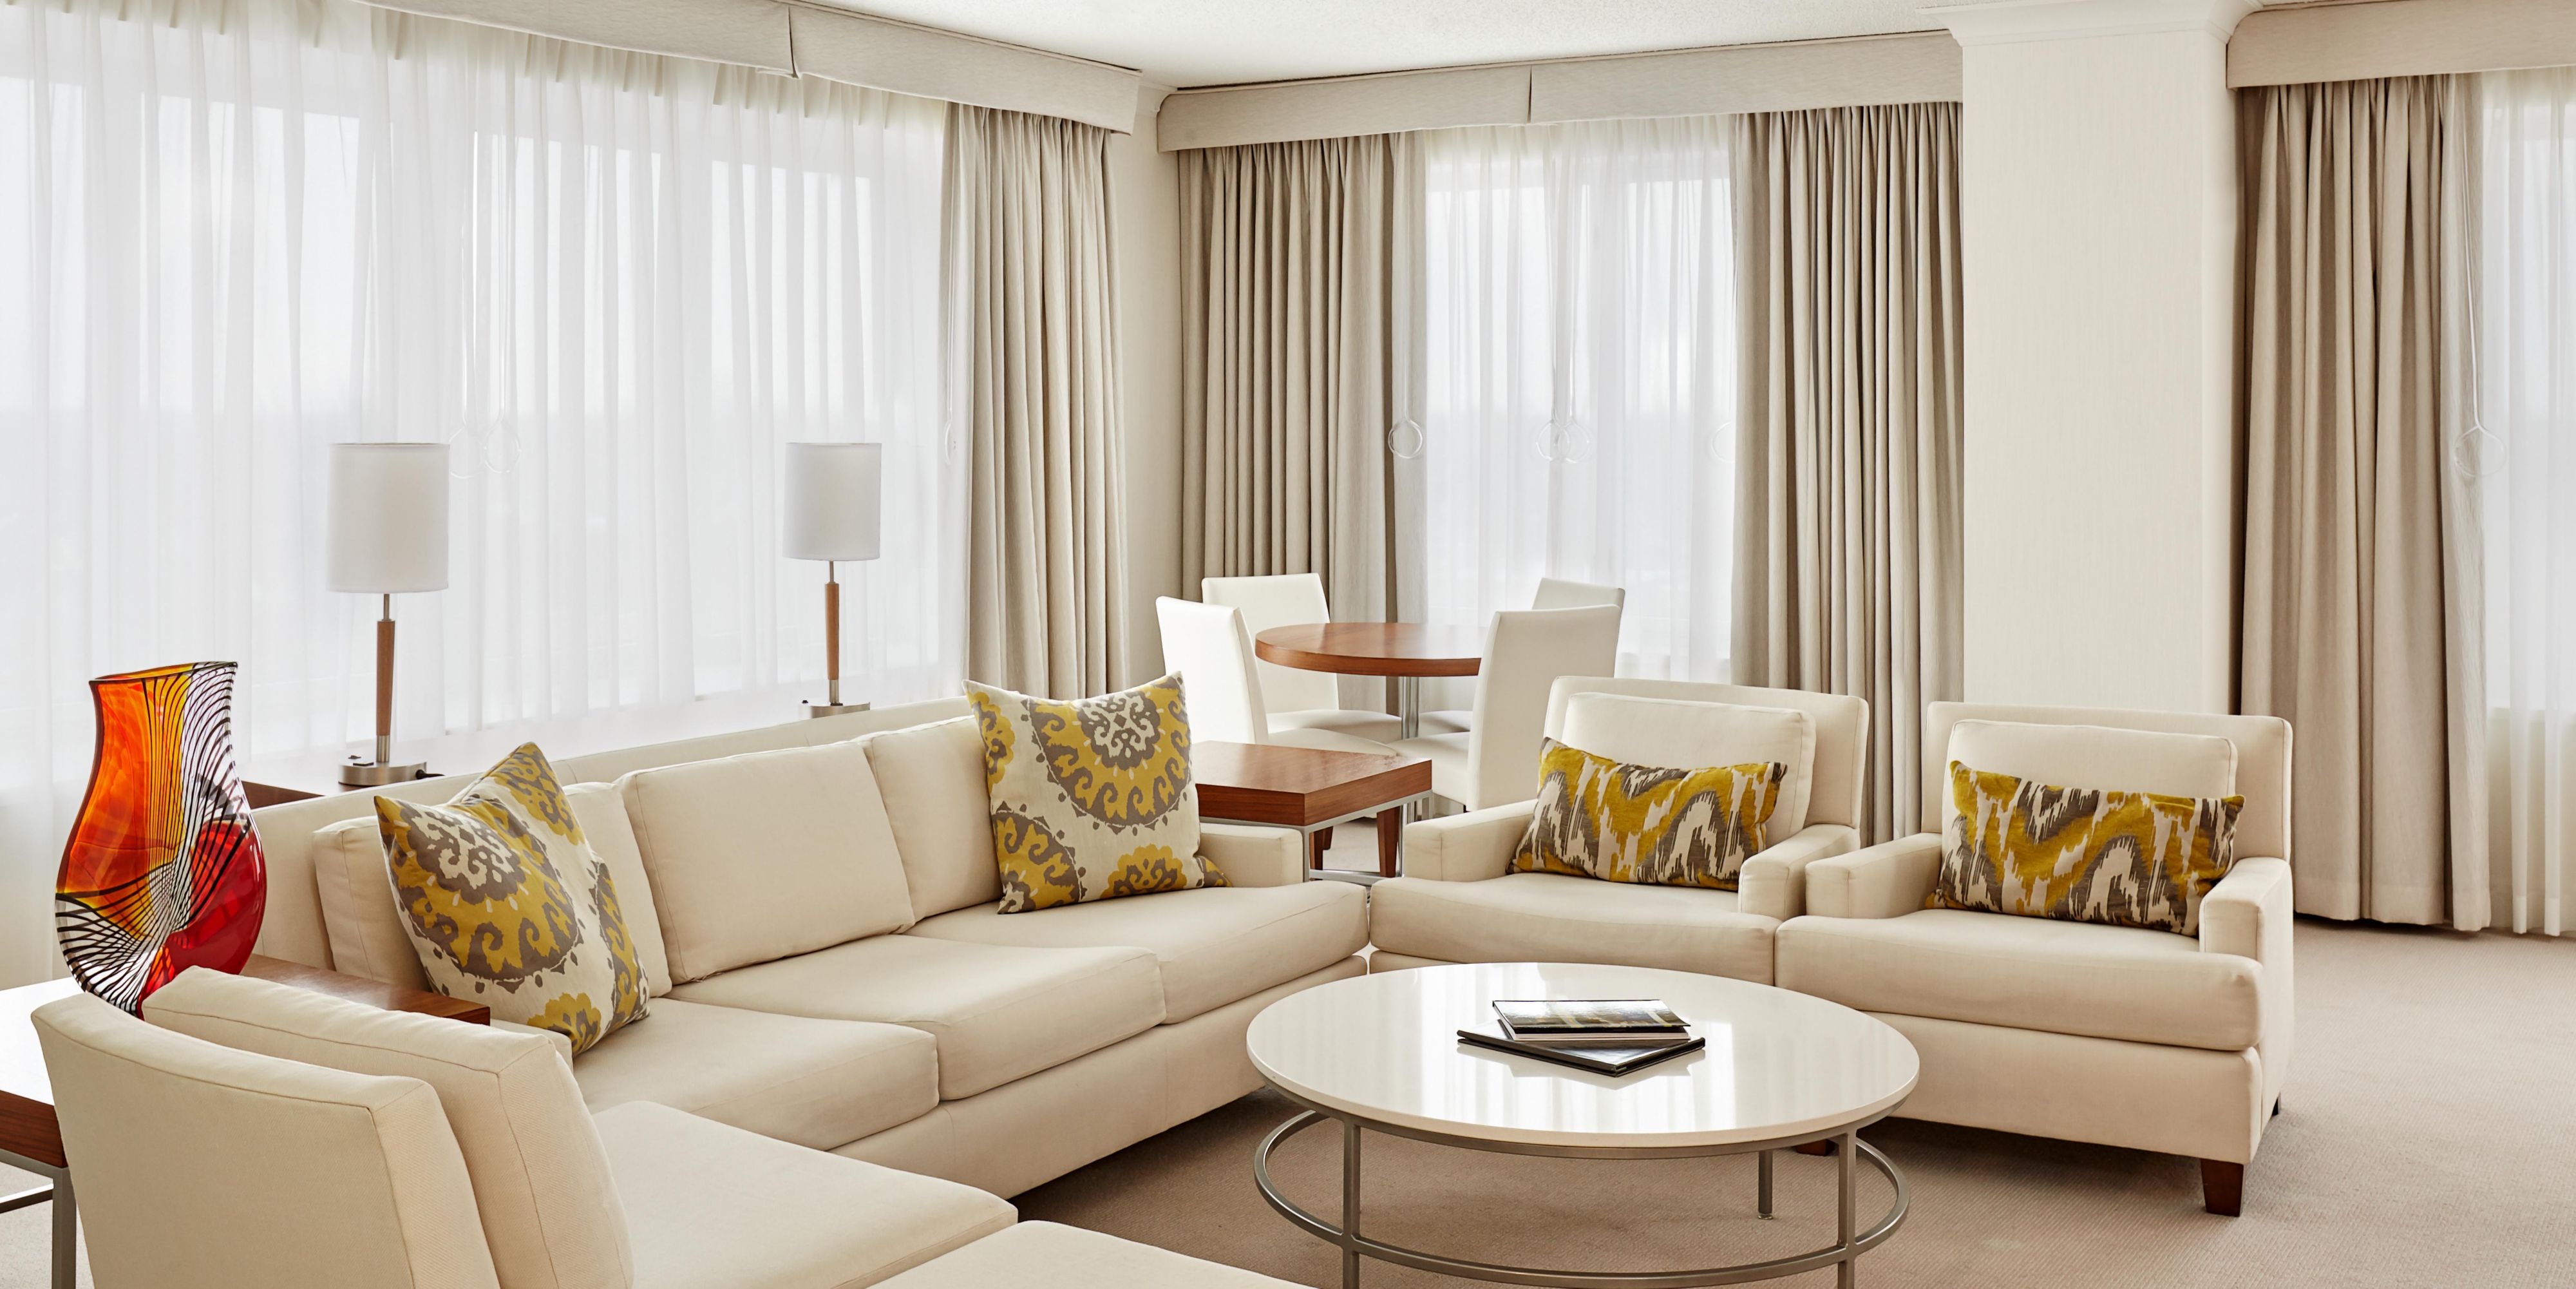 Using advanced anti-viral technology to eliminate contaminants, our hypoallergenic suites ensure wellbeing. Purified air and allergy-free bedding are a signature of these two-bay suites which feature separate living and dining areas, a queen sleeper sofa, wet bar, refrigerator, and microwave. 